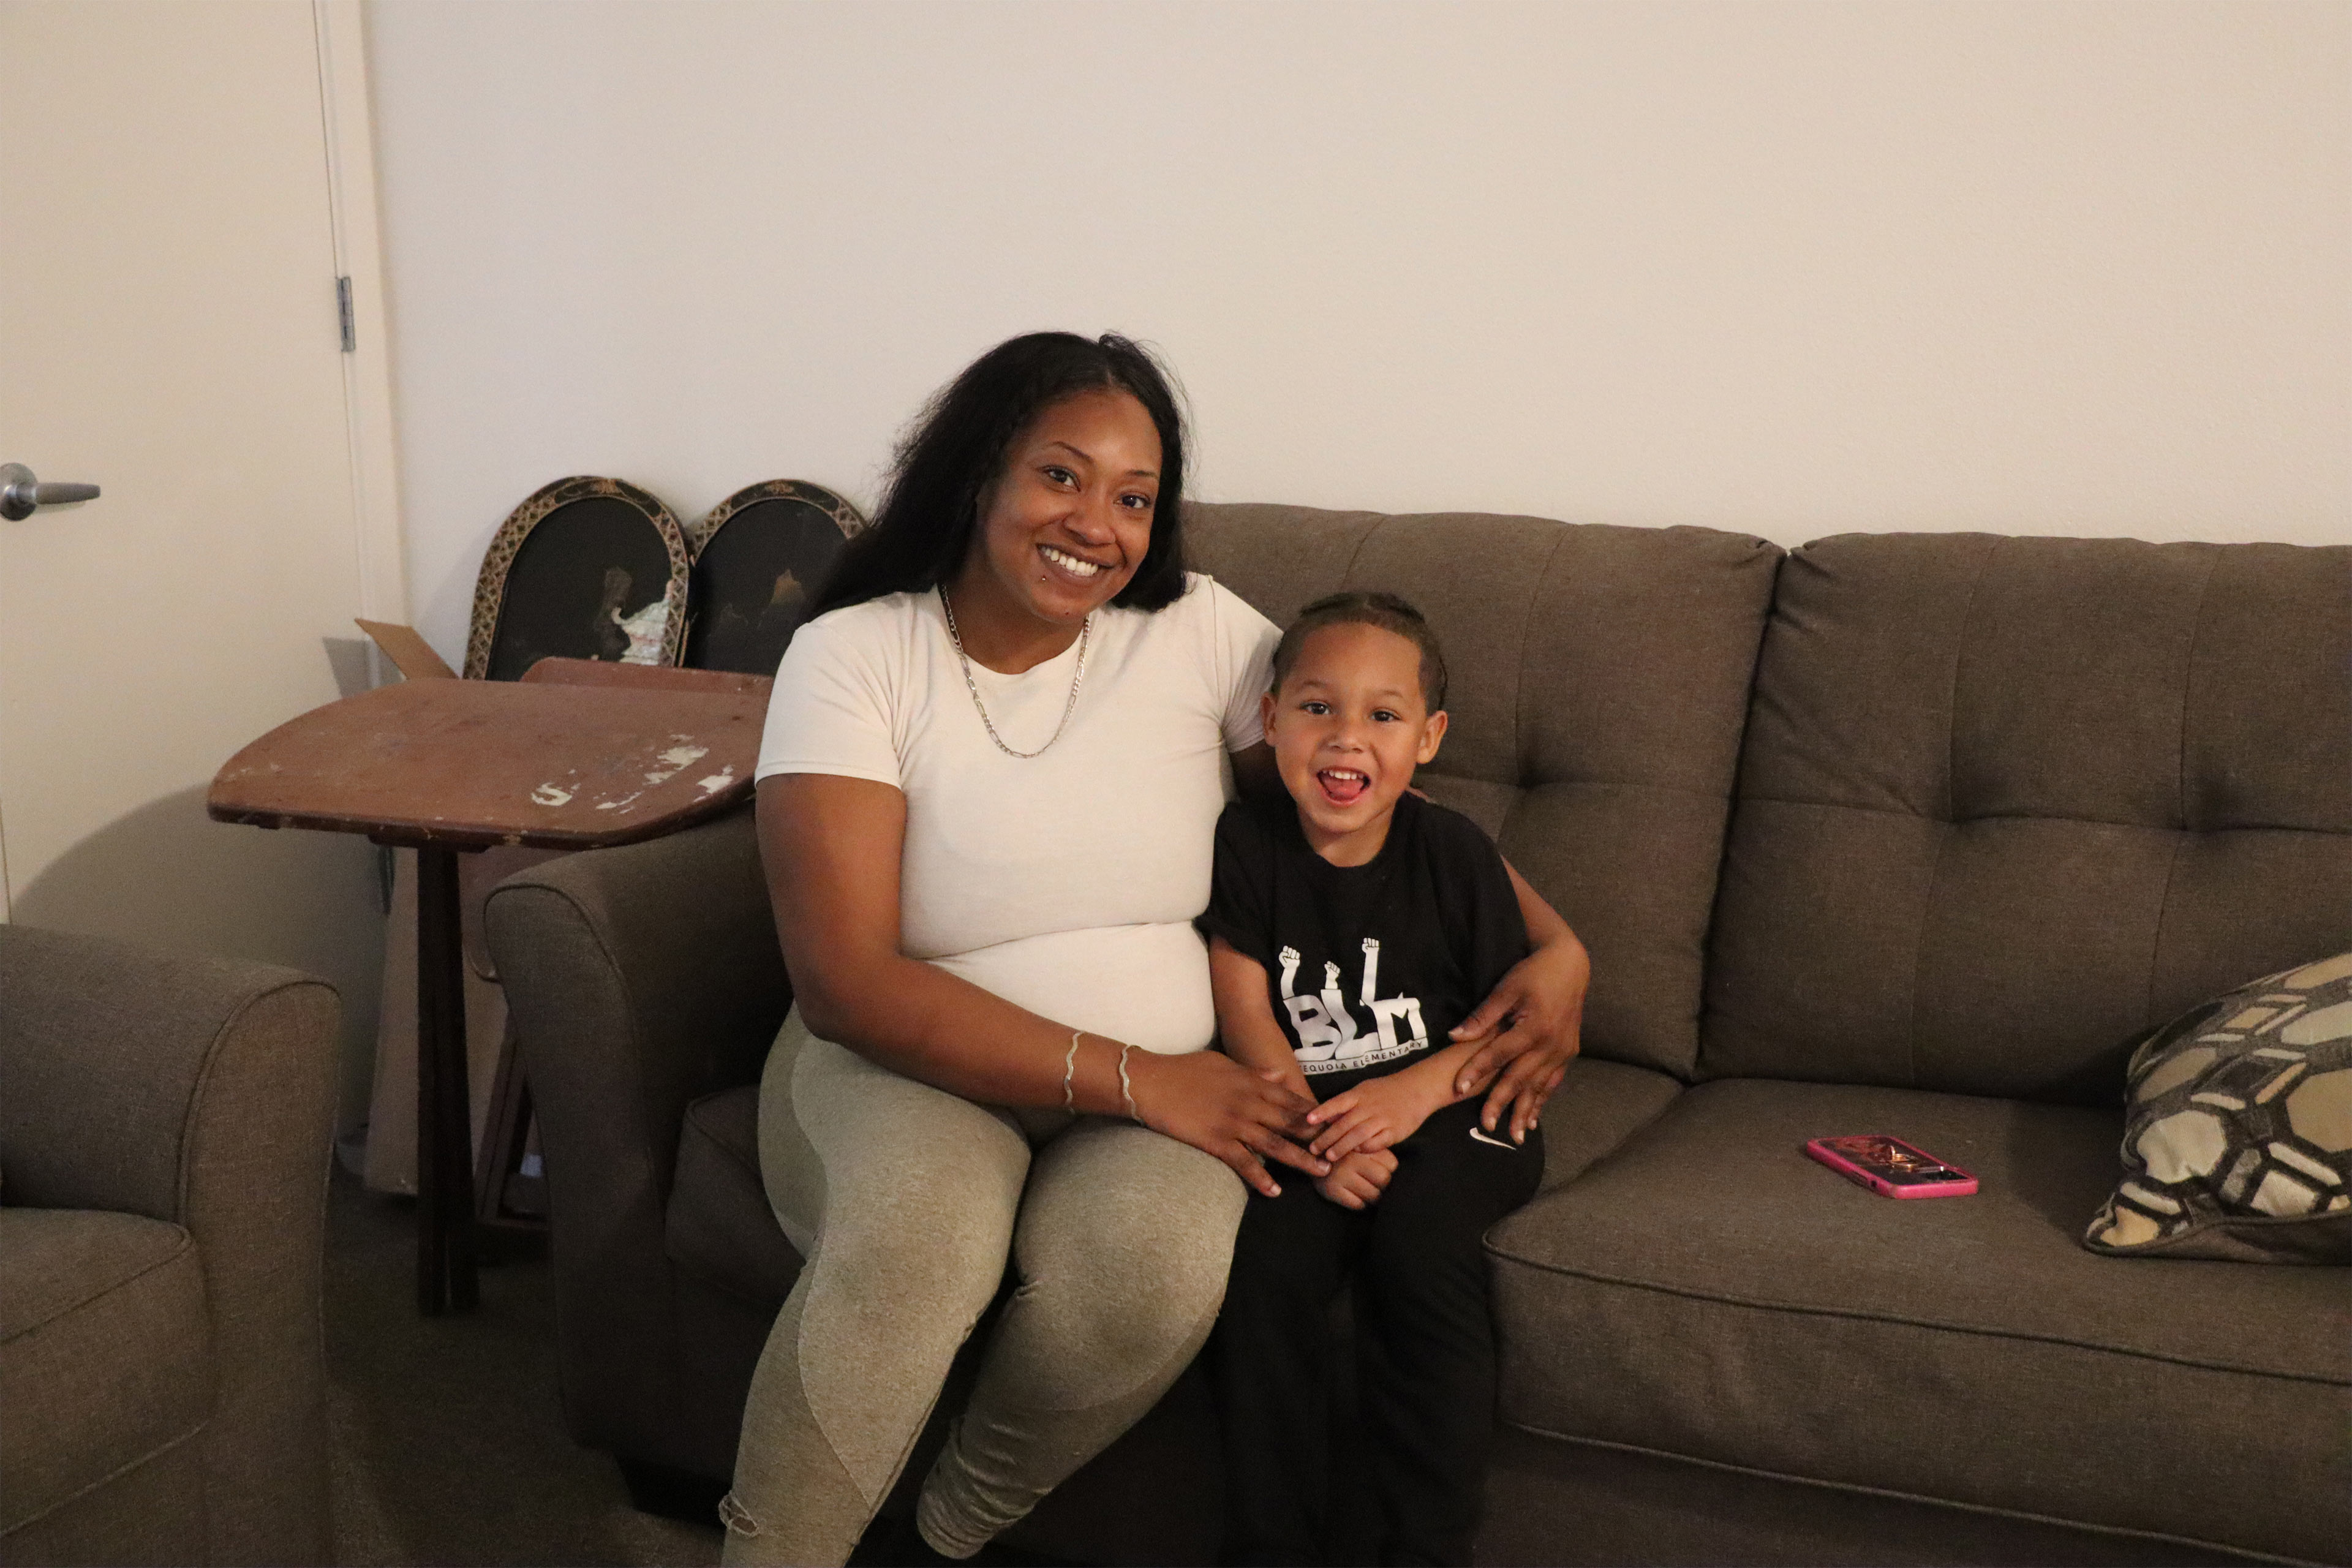 A woman and her young son sit on a couch and smile at the camera.